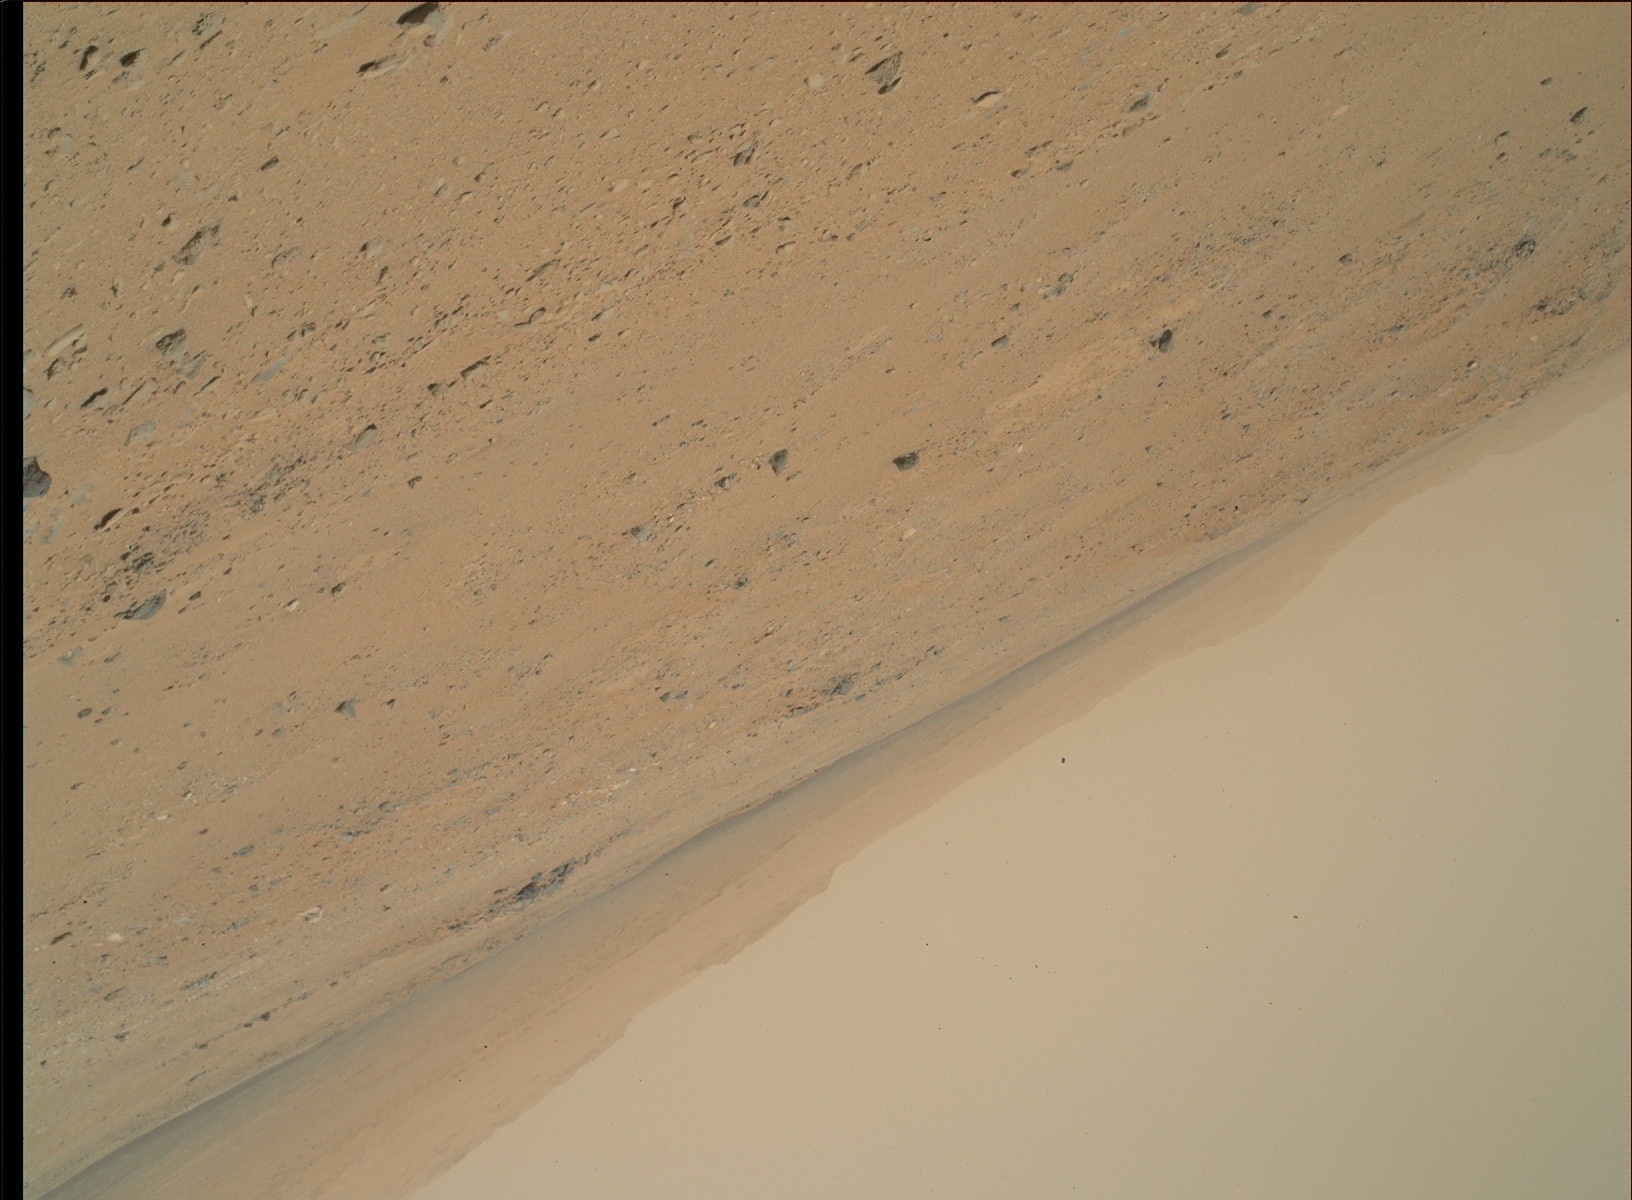 Nasa's Mars rover Curiosity acquired this image using its Mars Hand Lens Imager (MAHLI) on Sol 358